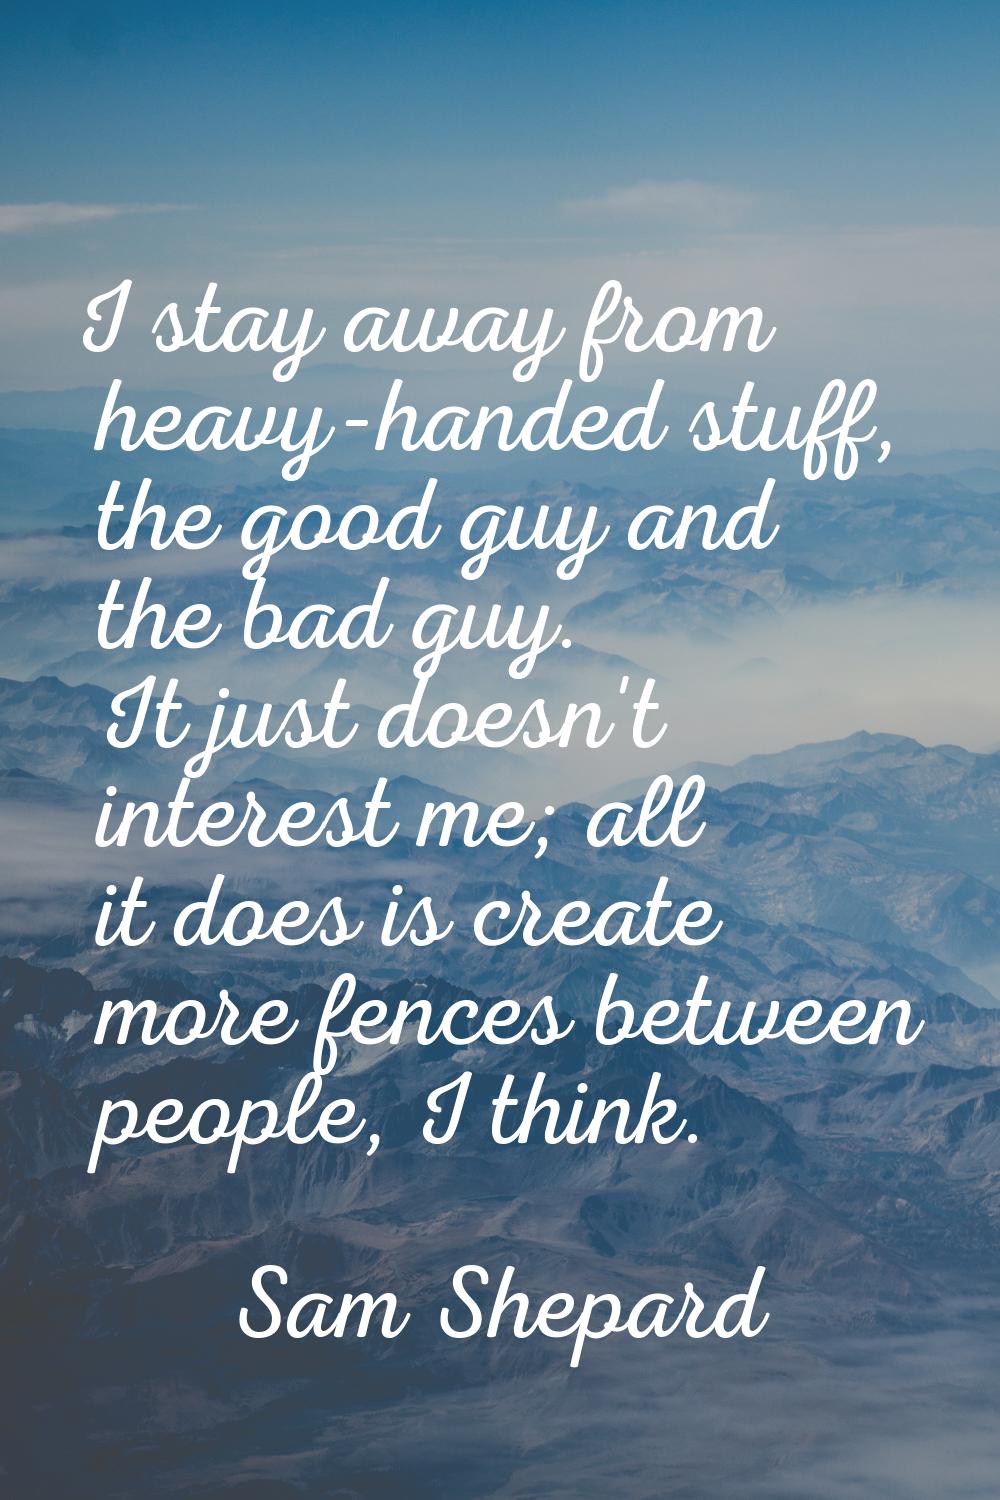 I stay away from heavy-handed stuff, the good guy and the bad guy. It just doesn't interest me; all